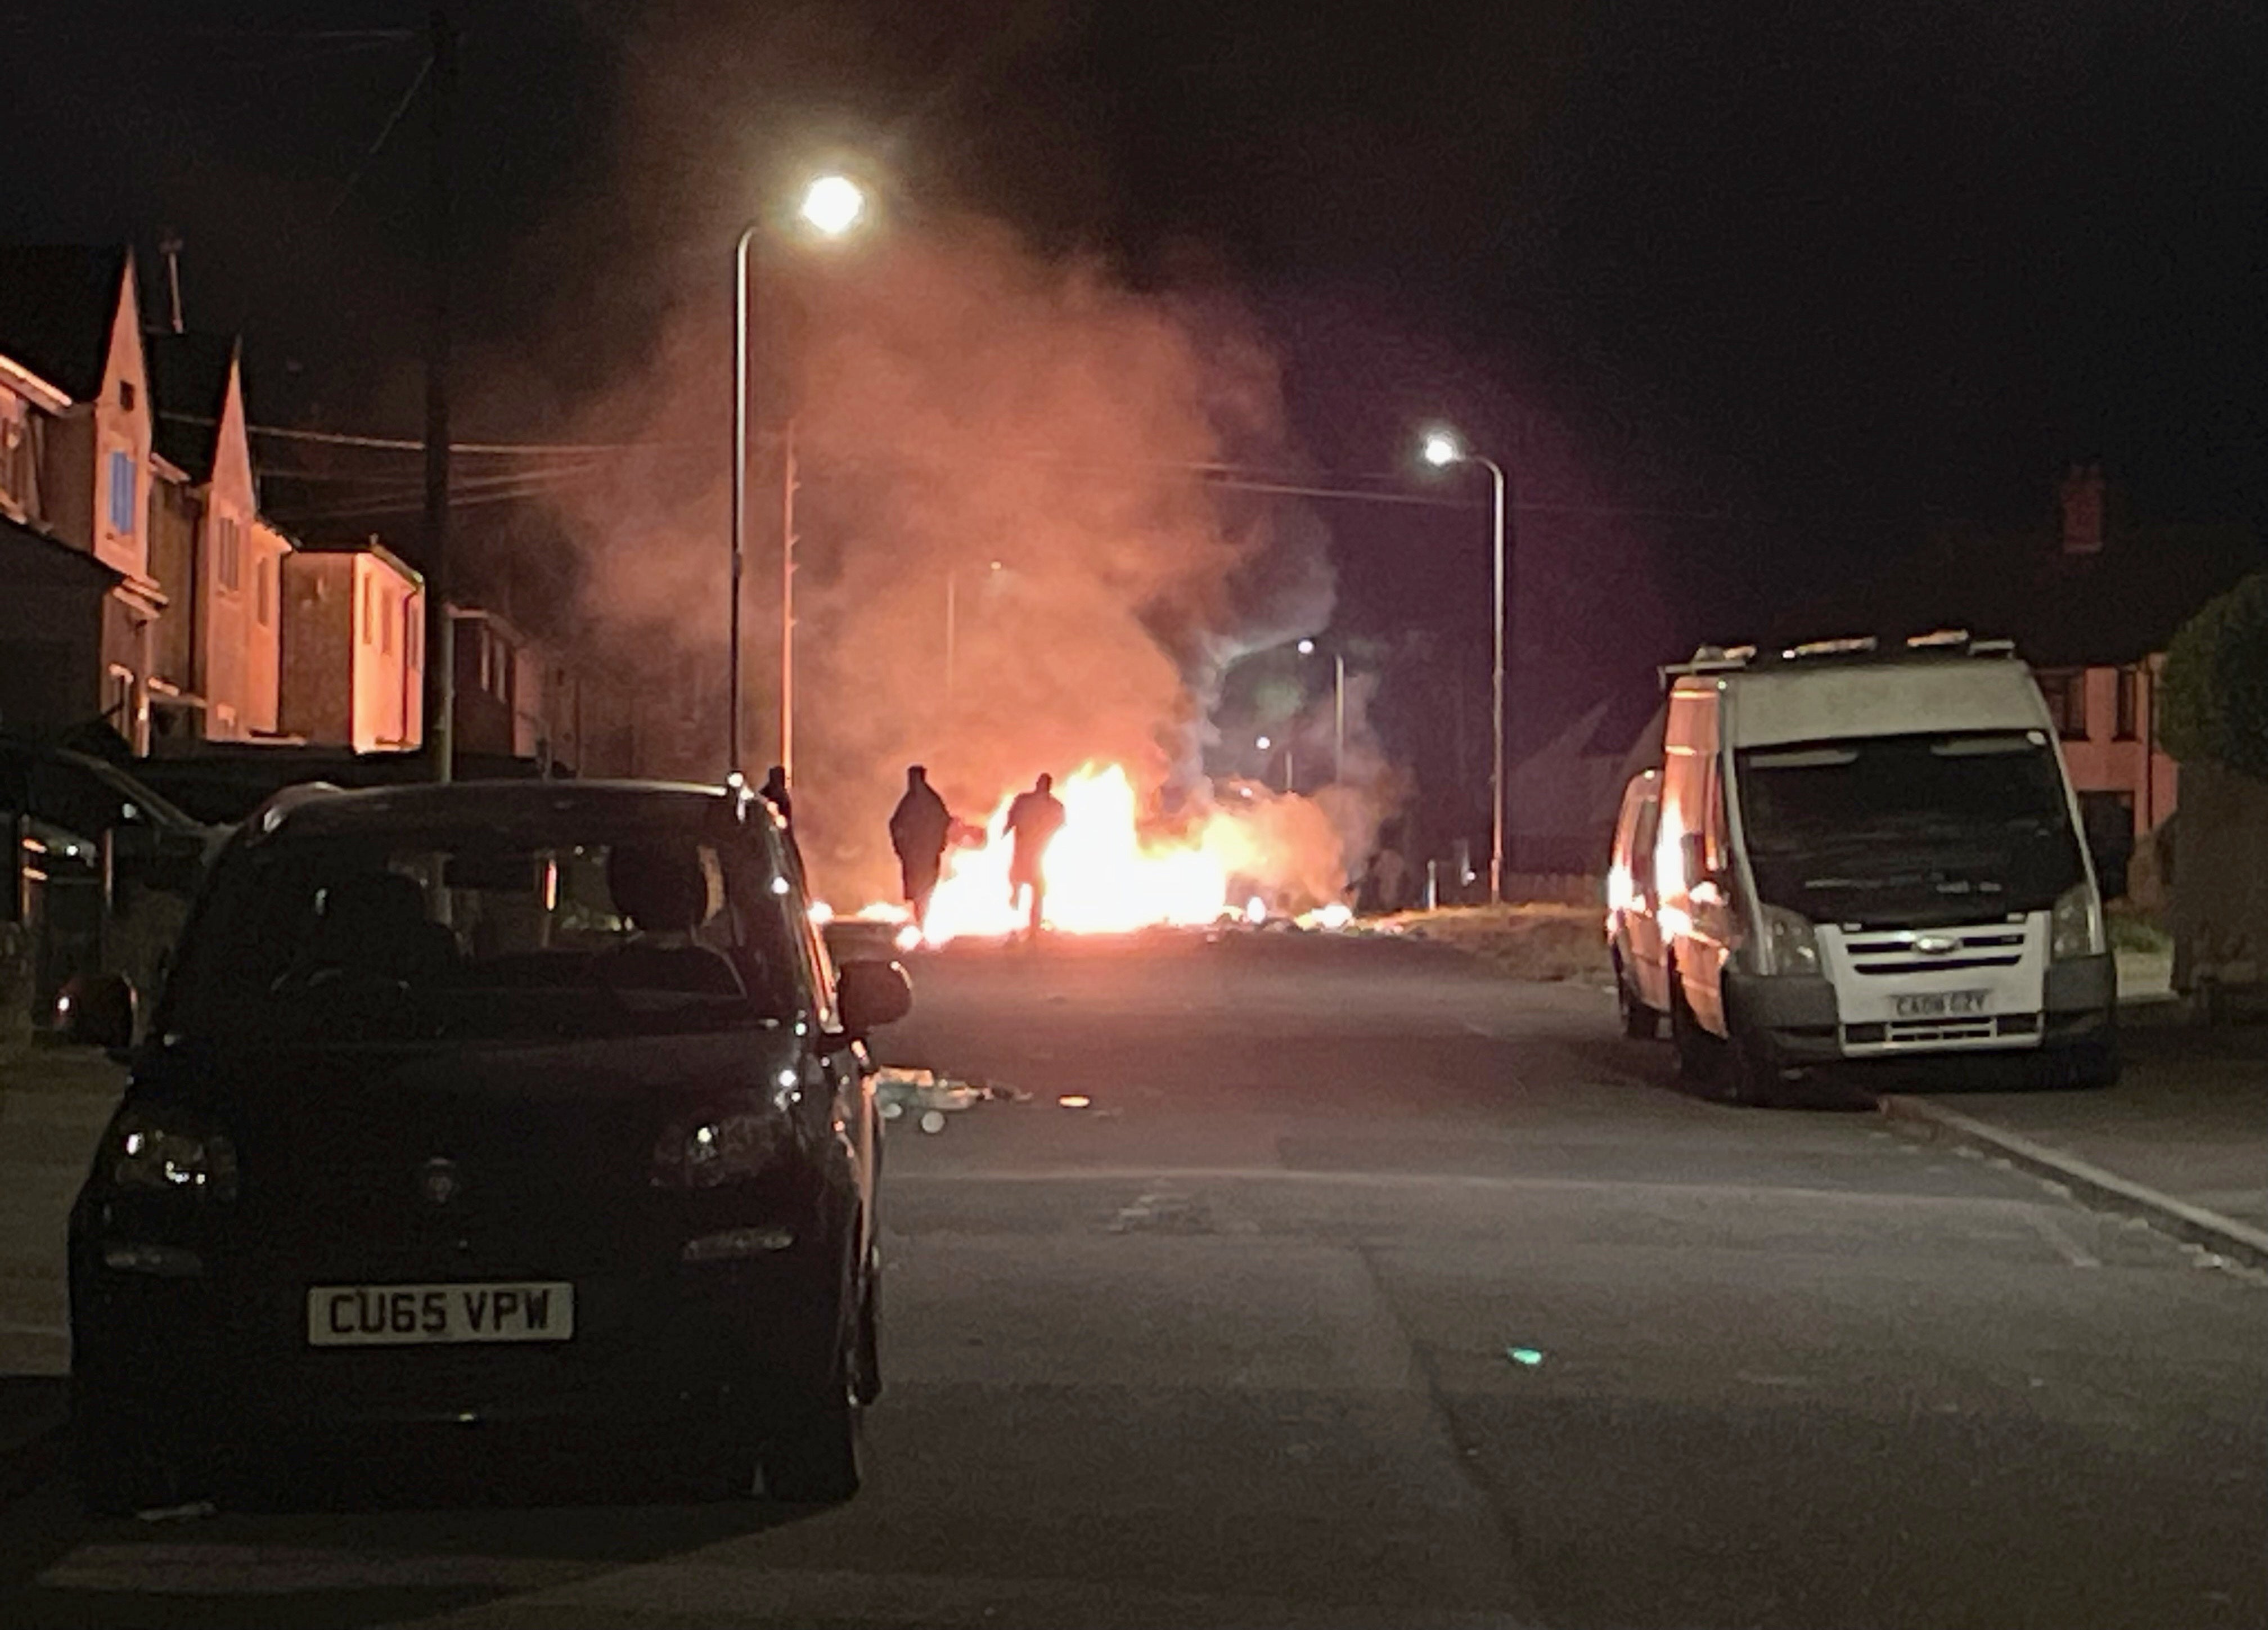 A Ford Focus set alight on Highmead Road, Ely during the disorder